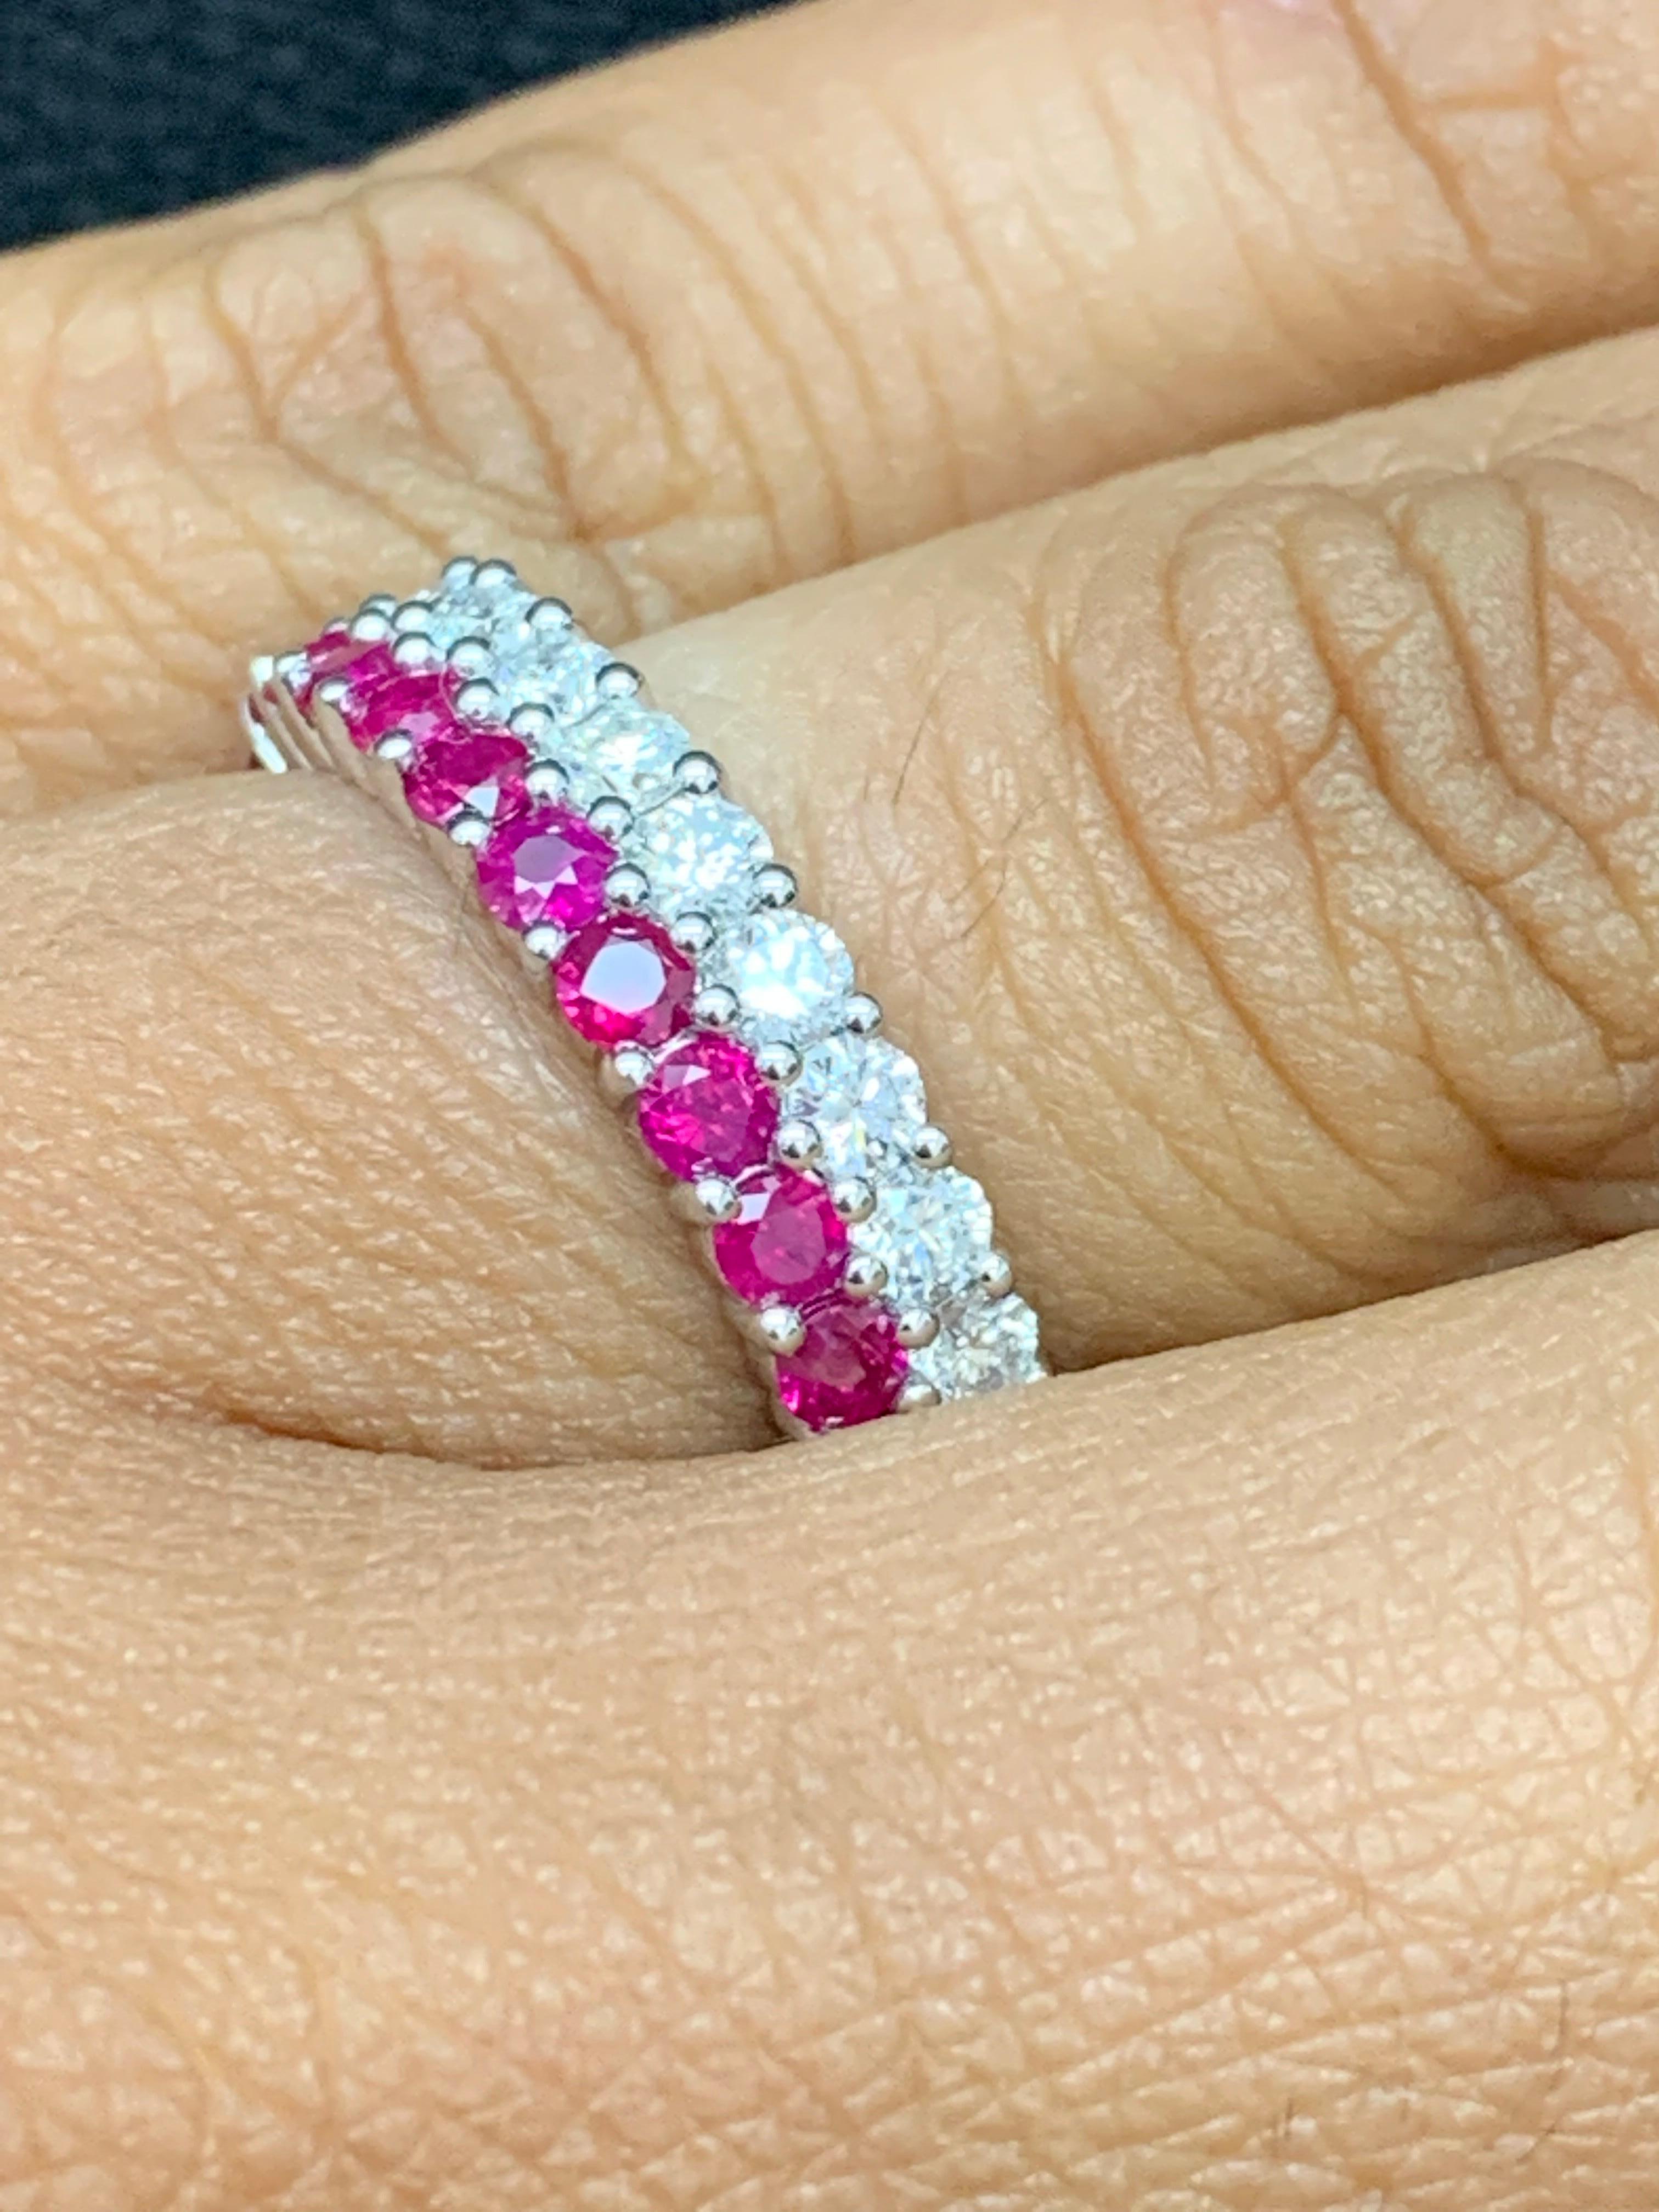 A unique and fashionable ring showcasing two rows of round-shape 13 rubies and 14 diamonds, set in a band design. Rubies weigh 0.81 carats and Diamonds weigh 0.70 carats total. A brilliant and masterfully-made piece.

Style available in different